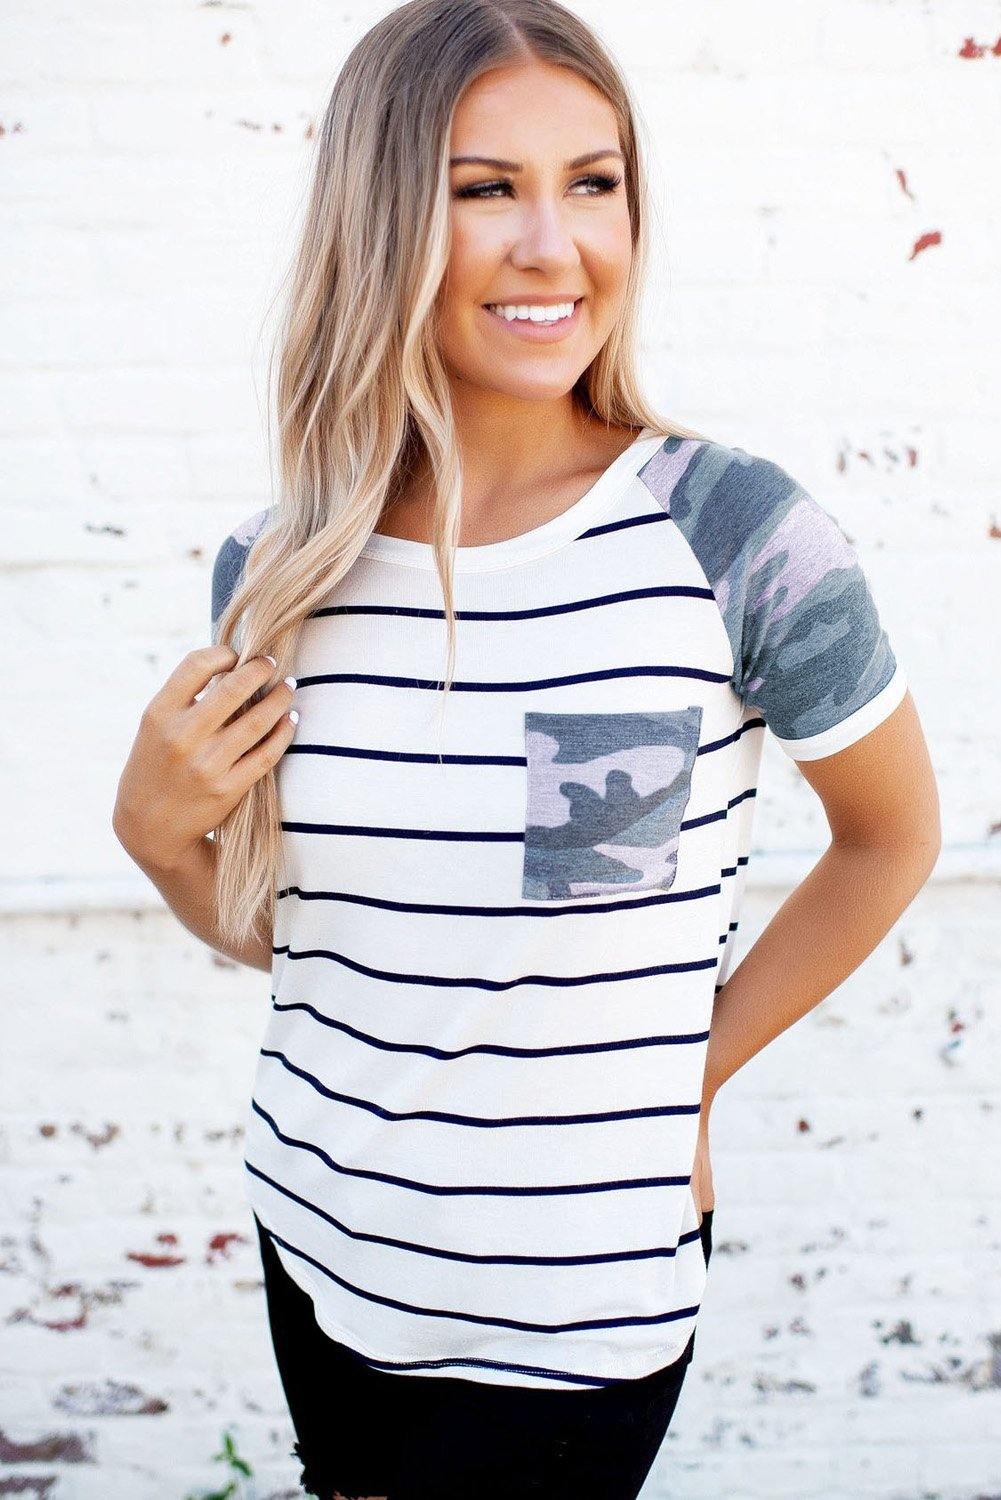 Striped Camo Pocketed Patch Tee - L & M Kee, LLC